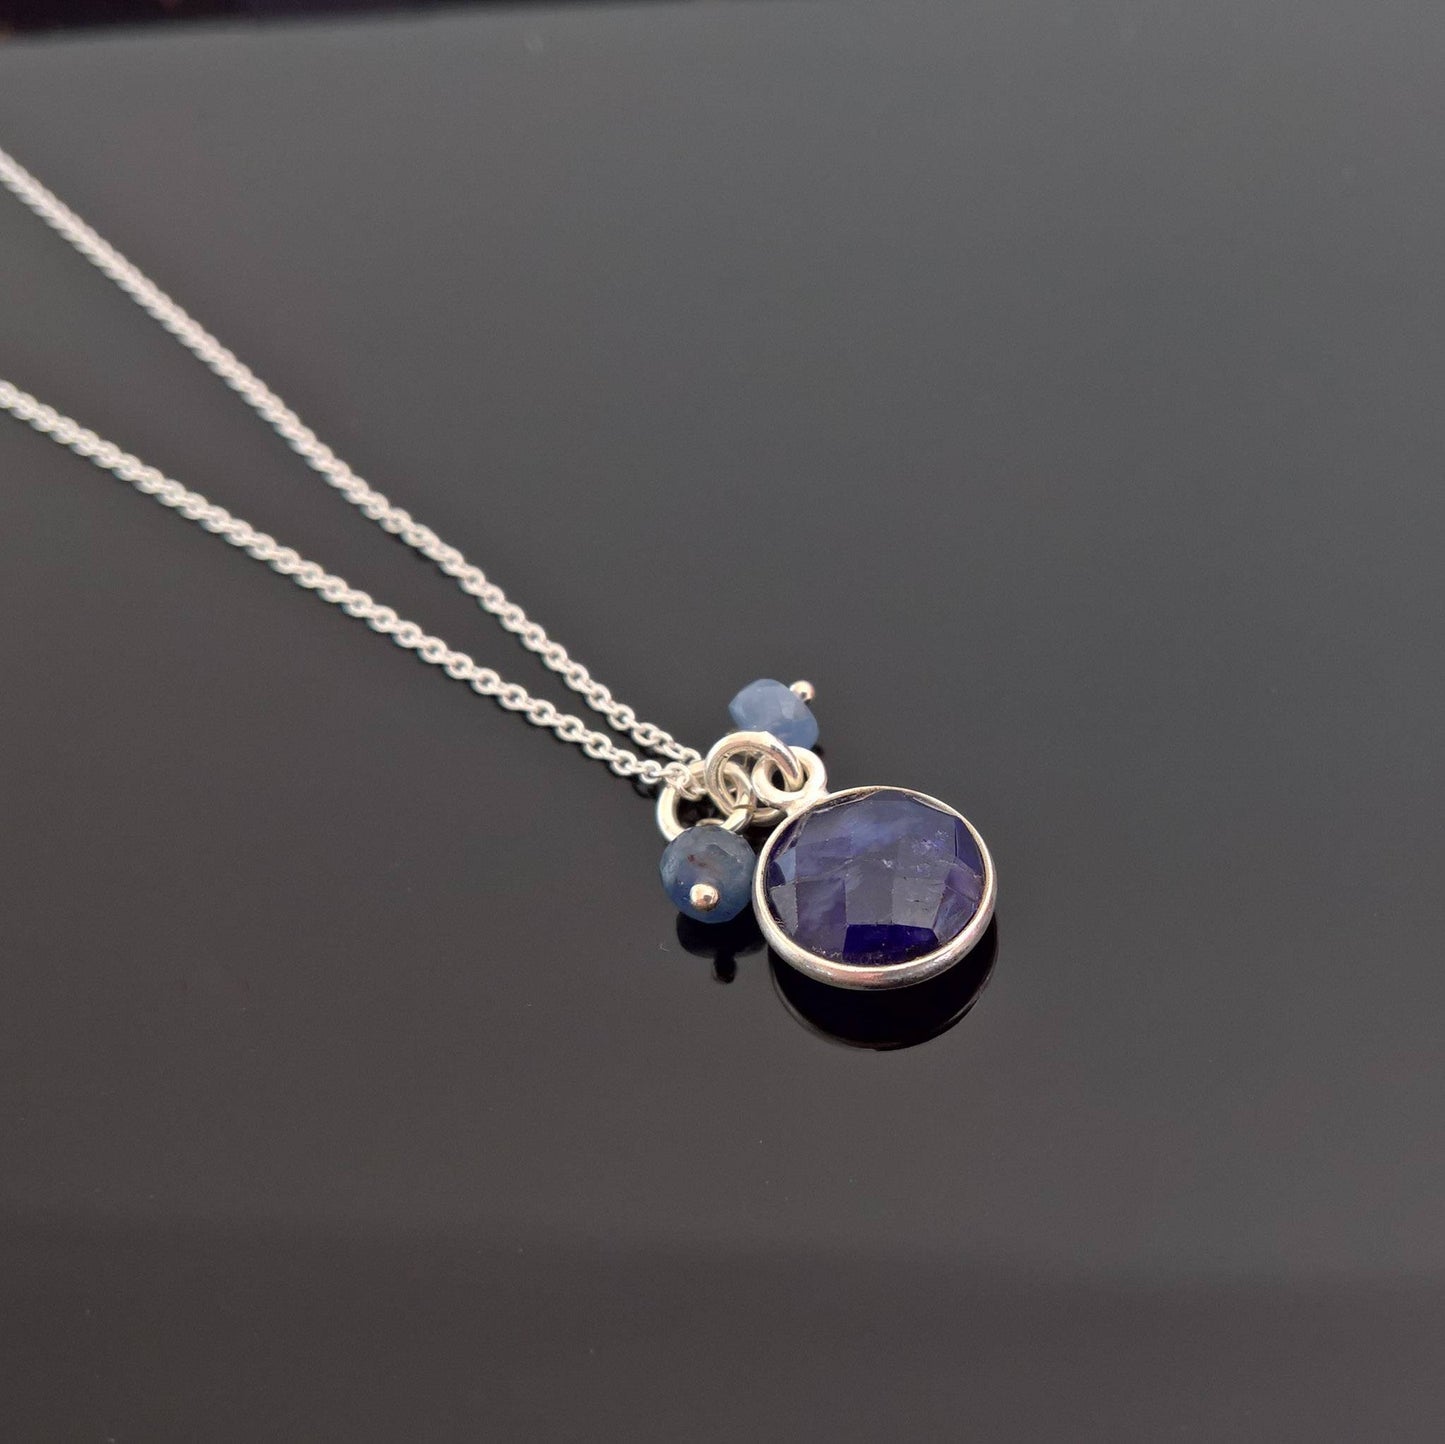 Blue sapphire pendant necklace in sterling silver